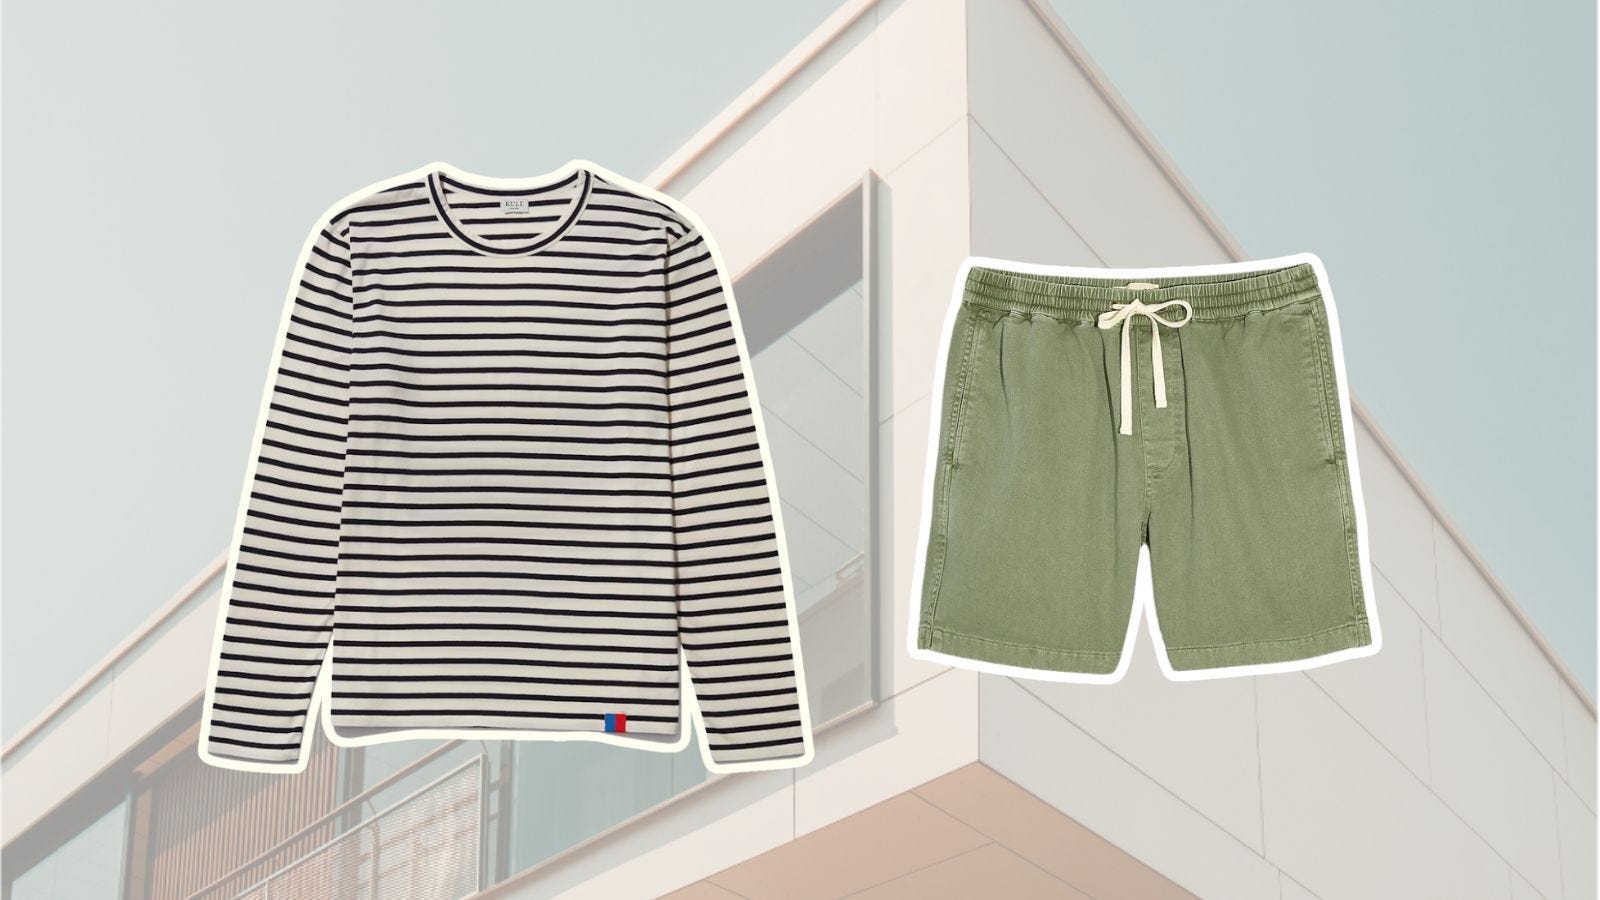 image of a men's striped Breton shirt and green drawstring shorts set against a faded background of a modern home